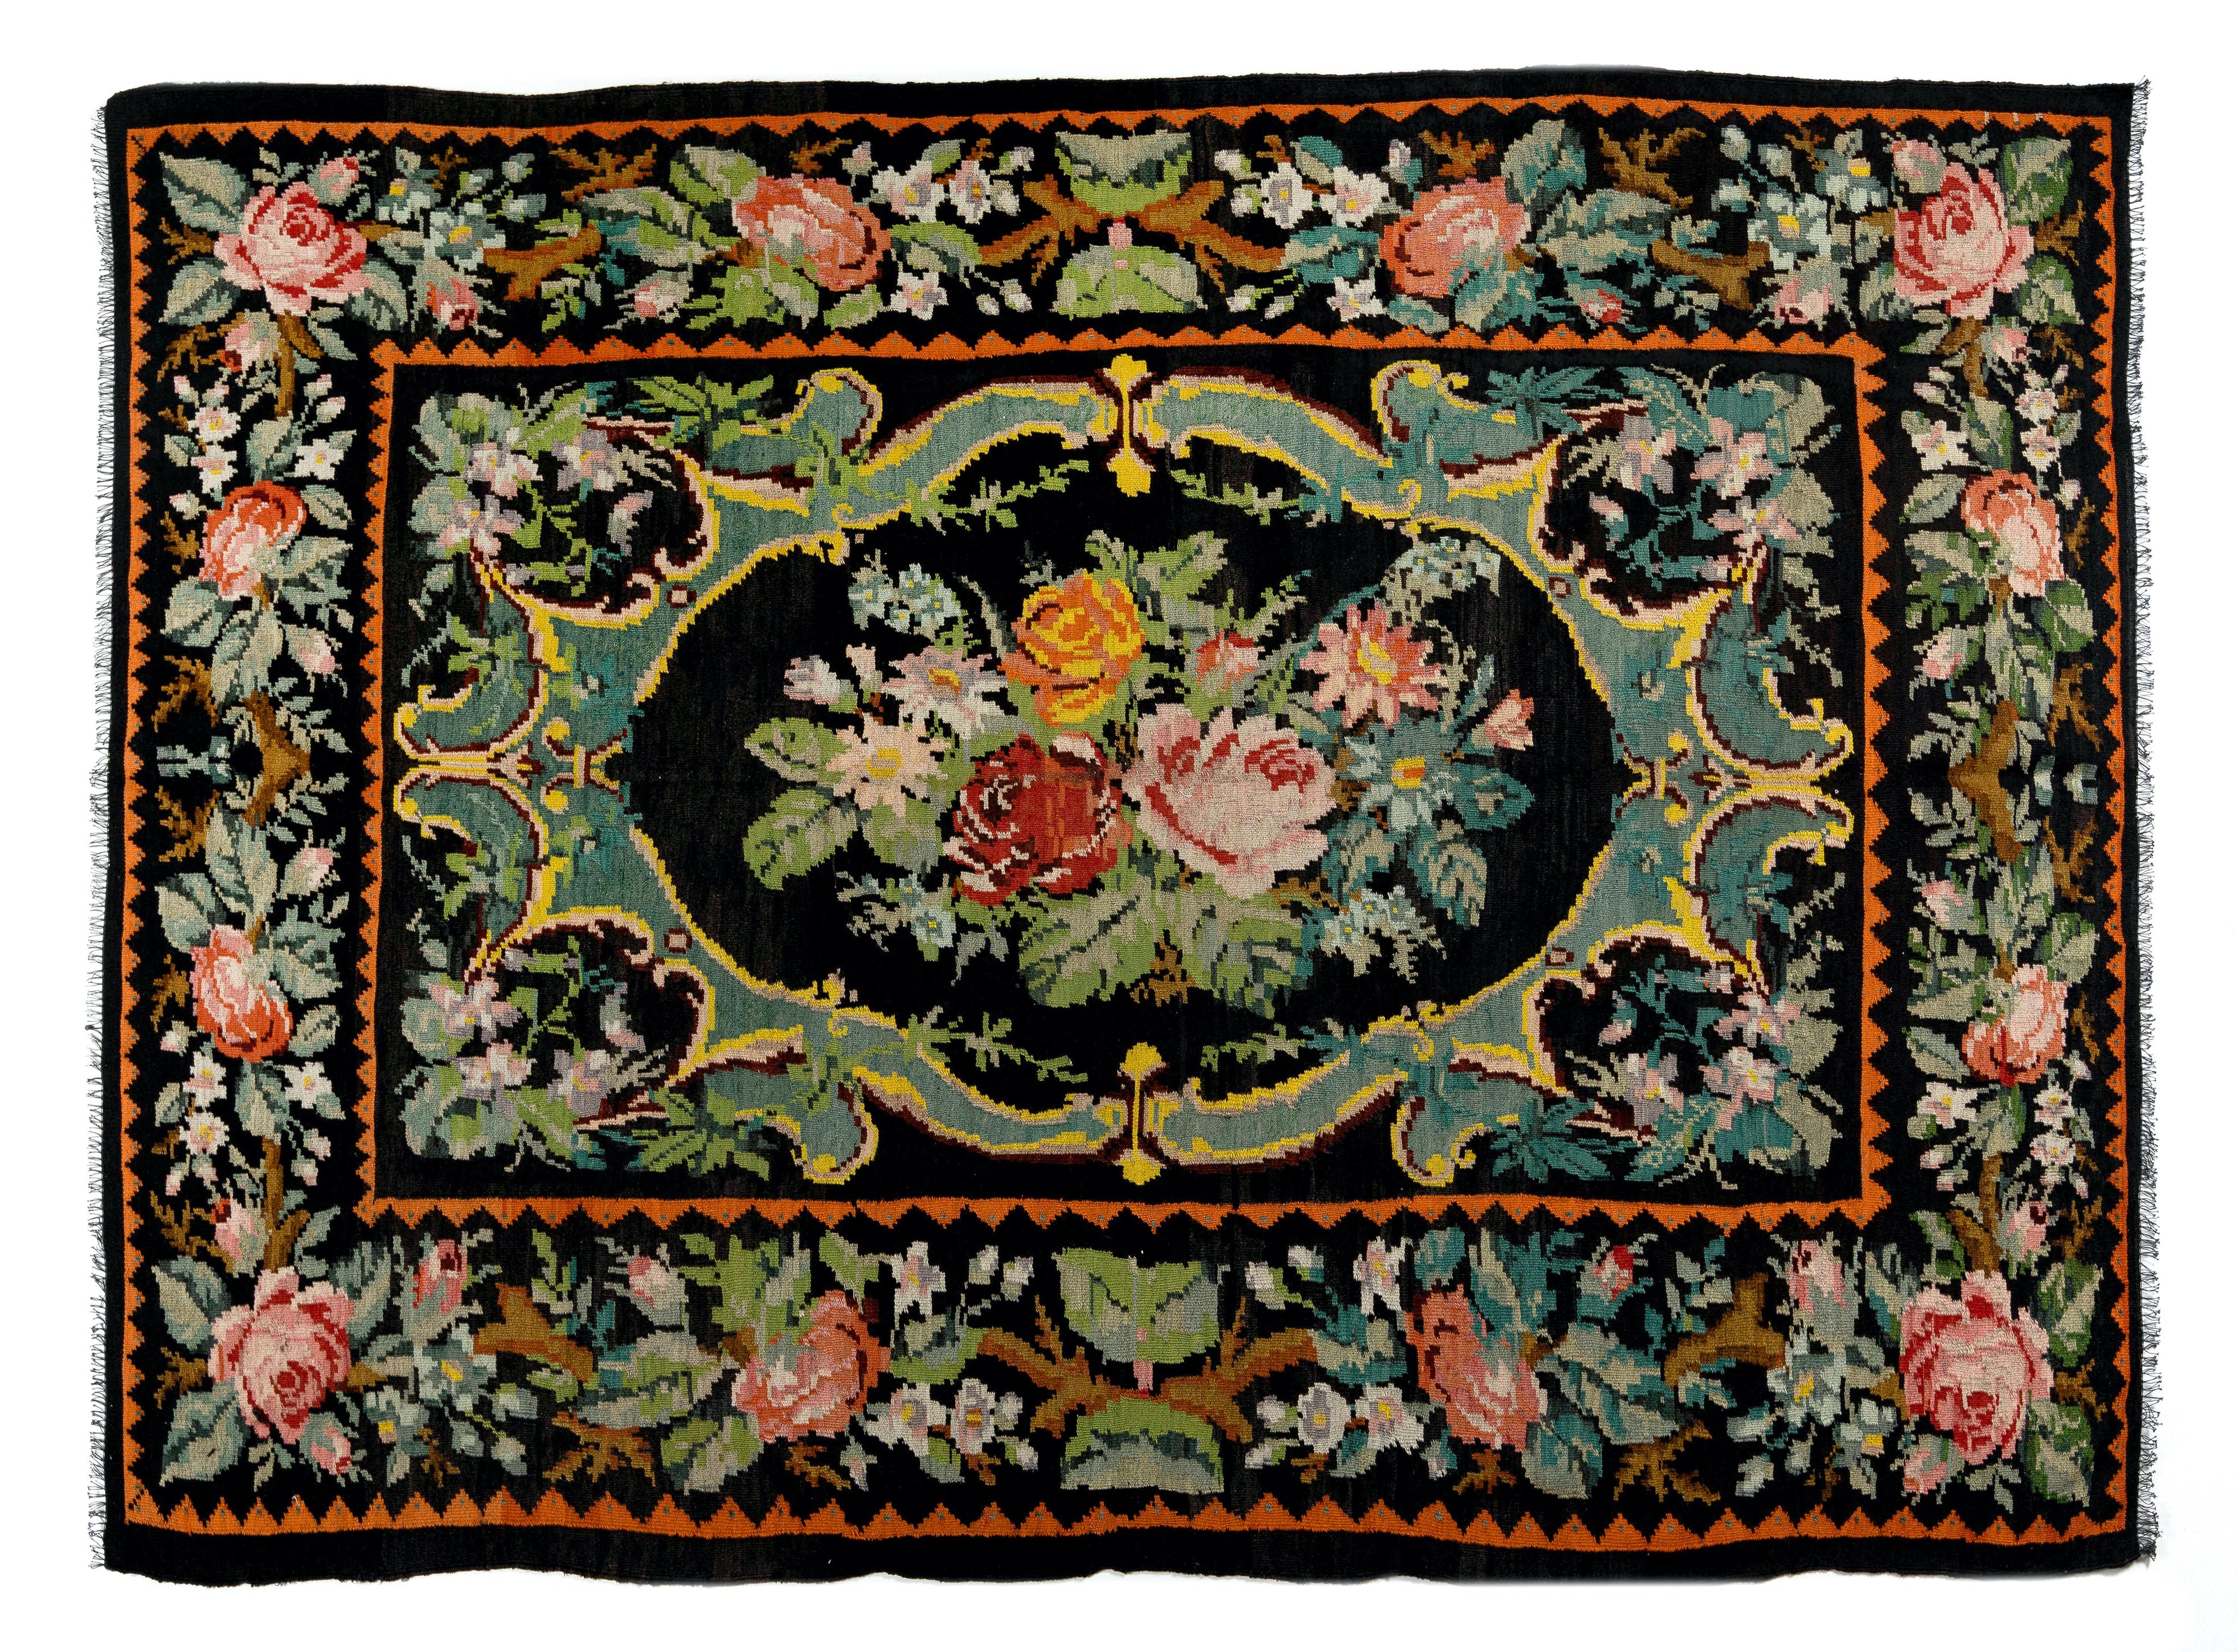 One of a kind vintage Bessarabian Kilim.
A handwoven Eastern European Rug from Moldova. These traditional Moldovan flat-weaves are inspired from vintage Aubusson carpets but they are distinguished with their black grounds, large floral patterns in